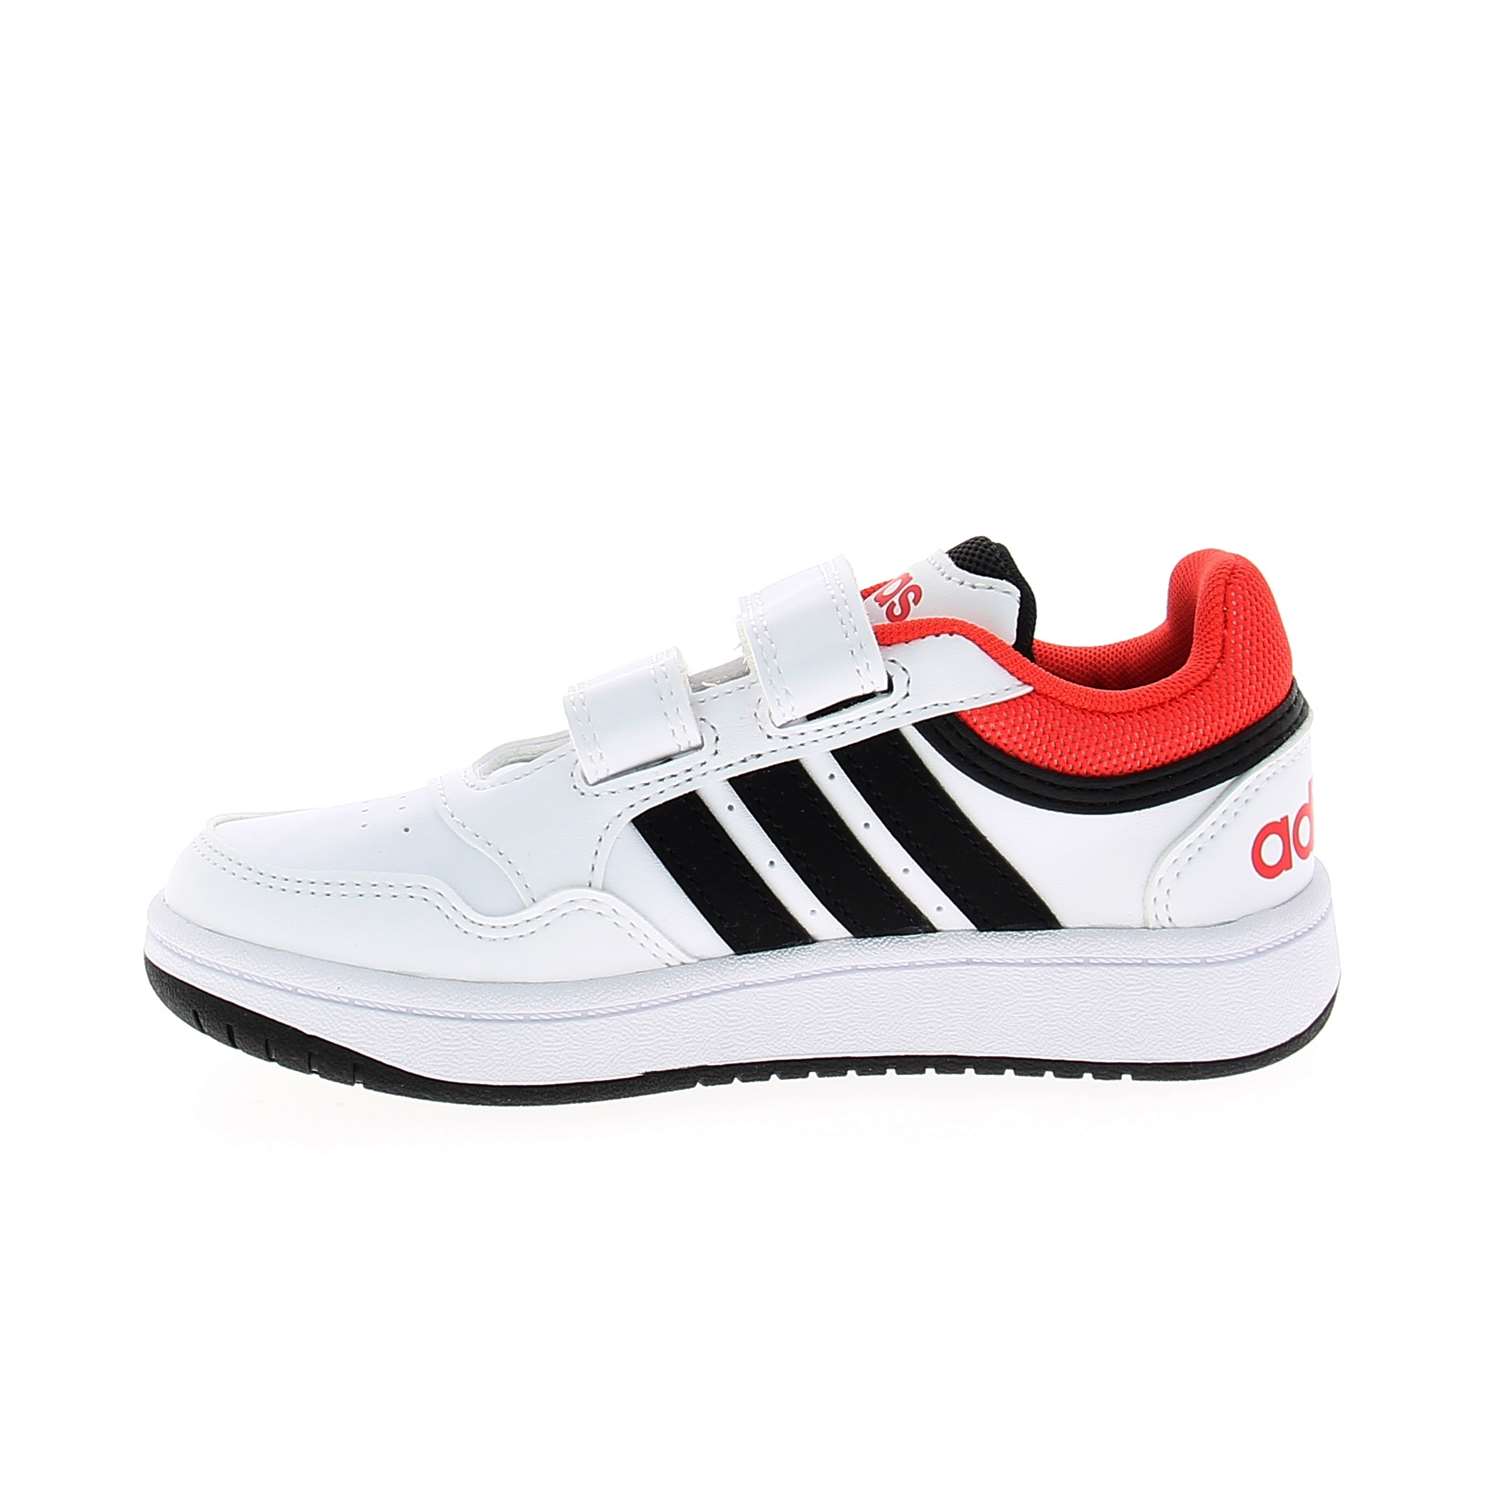 03 - HOOPS 3.0 - ADIDAS -  - Synthétique